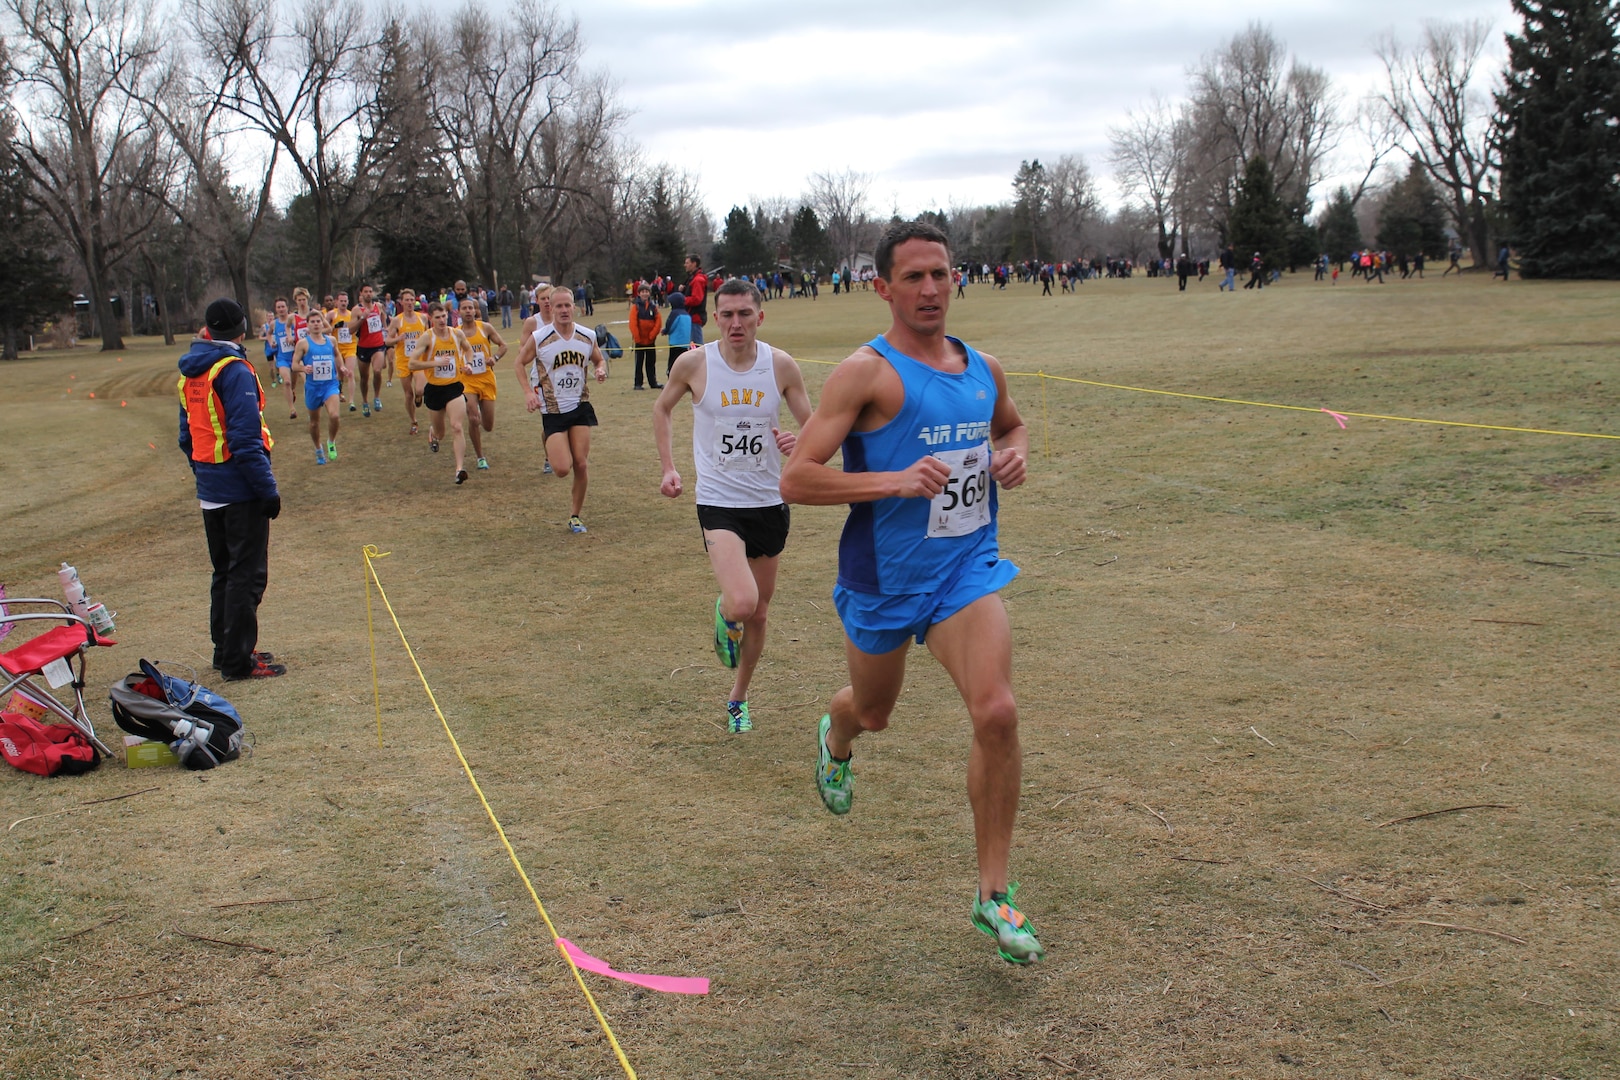 Air Force Capt. Benjamin Payne (Hurlburt Field, FL) captures bronze at the 2014 Armed Forces Cross Country Championship held in conjunction with the USA Track and Field Cross Country Championship in Boulder, CO on 15 February